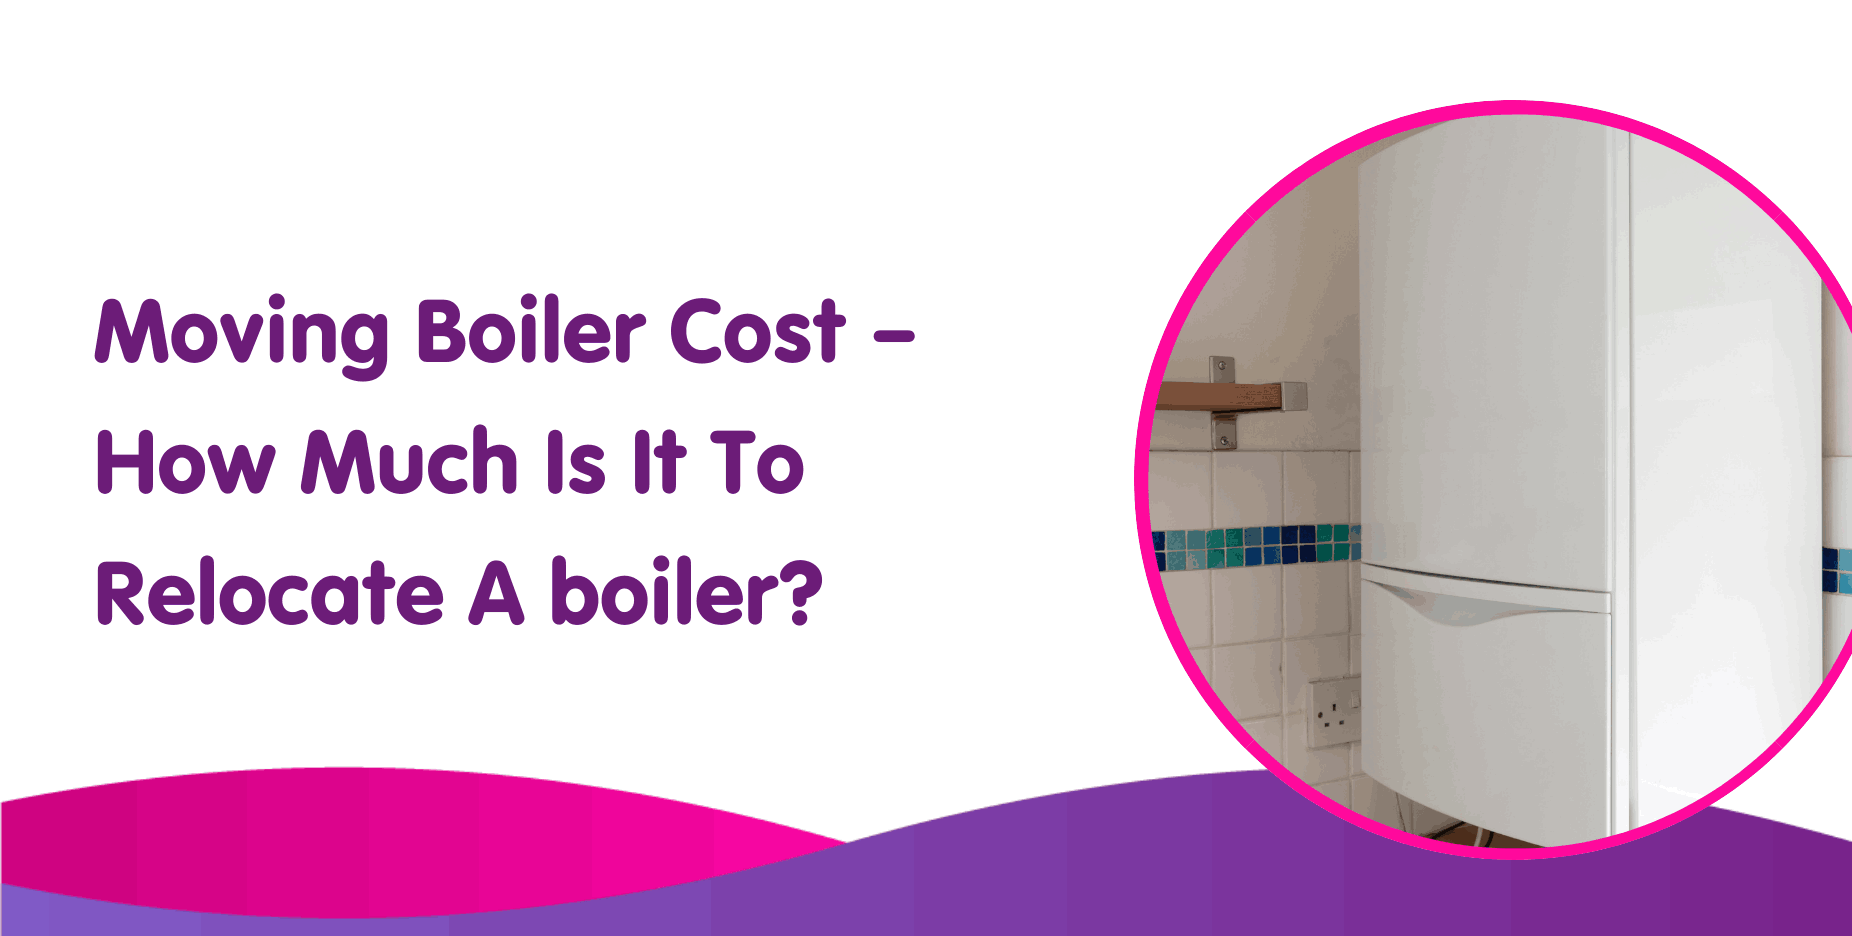 Moving Boiler Cost – How Much Is It To Relocate A boiler